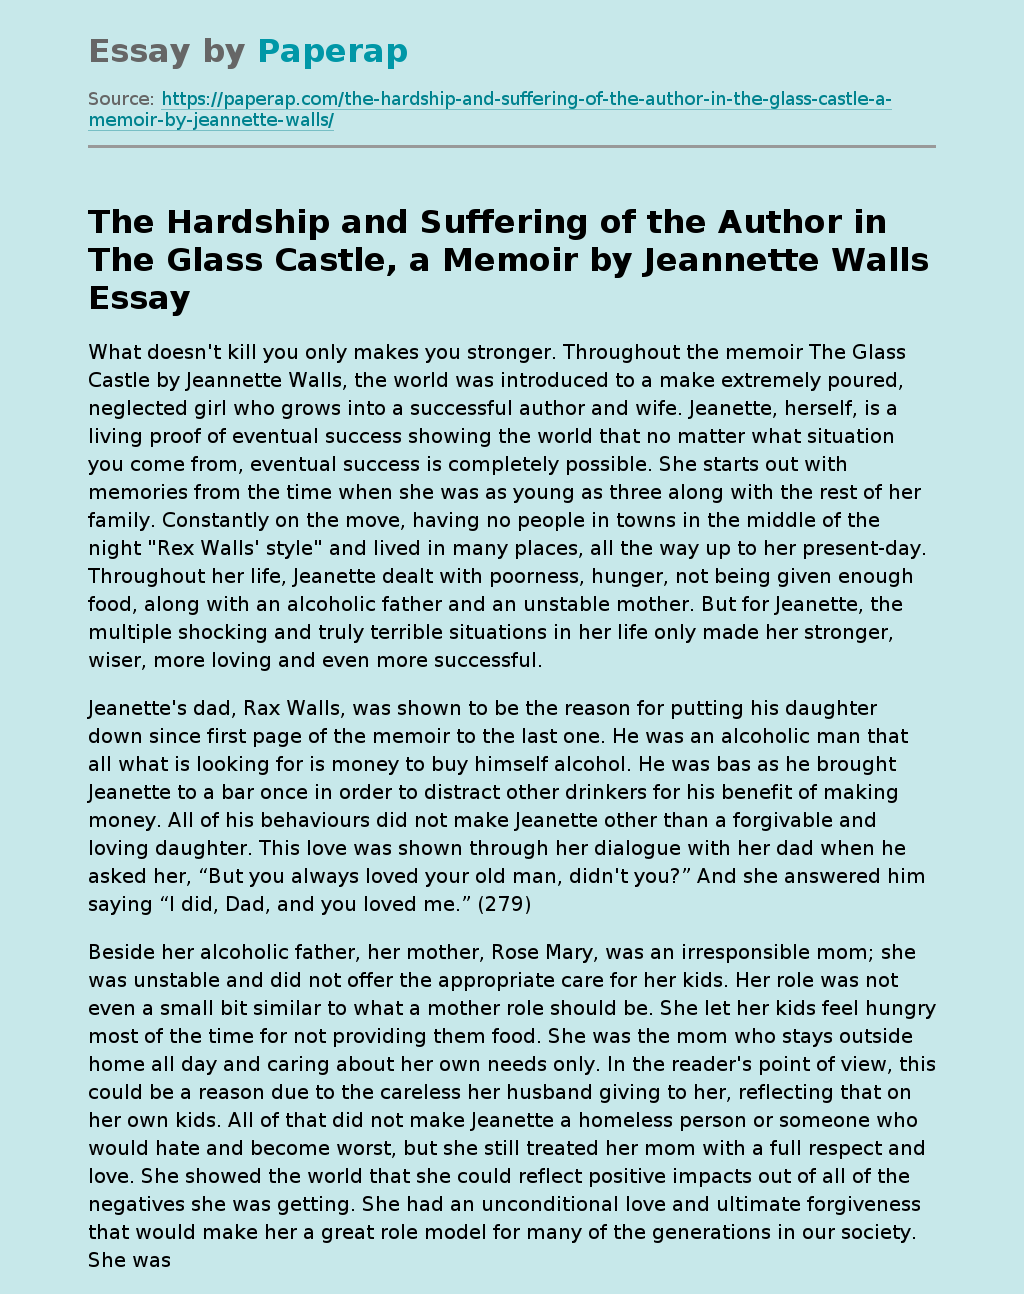 The Hardship and Suffering of the Author in The Glass Castle, a Memoir by Jeannette Walls